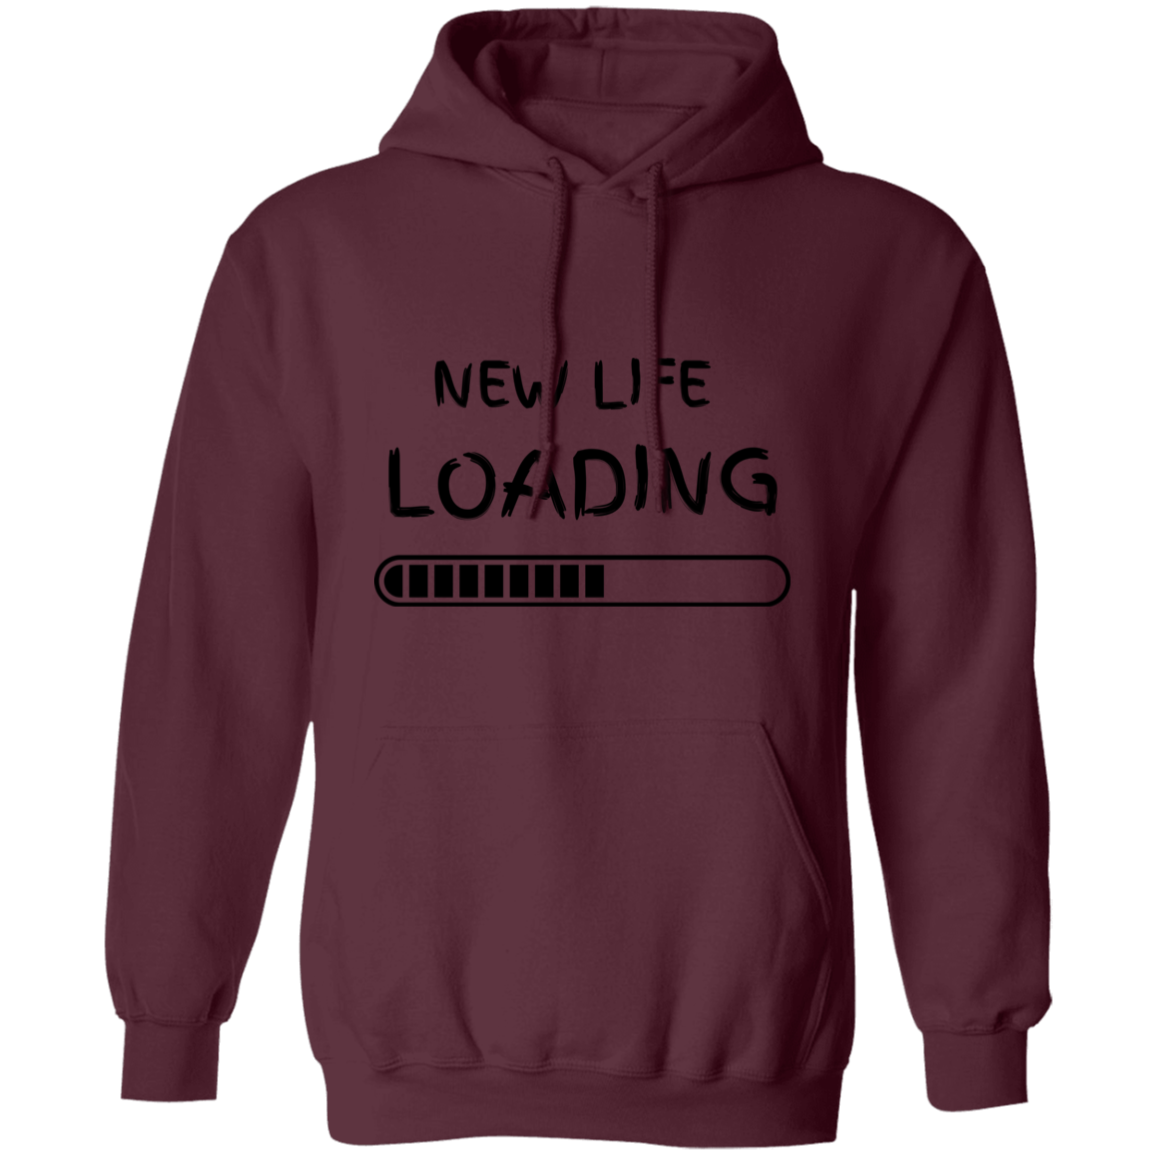 New Life Loading Pullover Hoodie, Birthday Gift , Holiday Gift